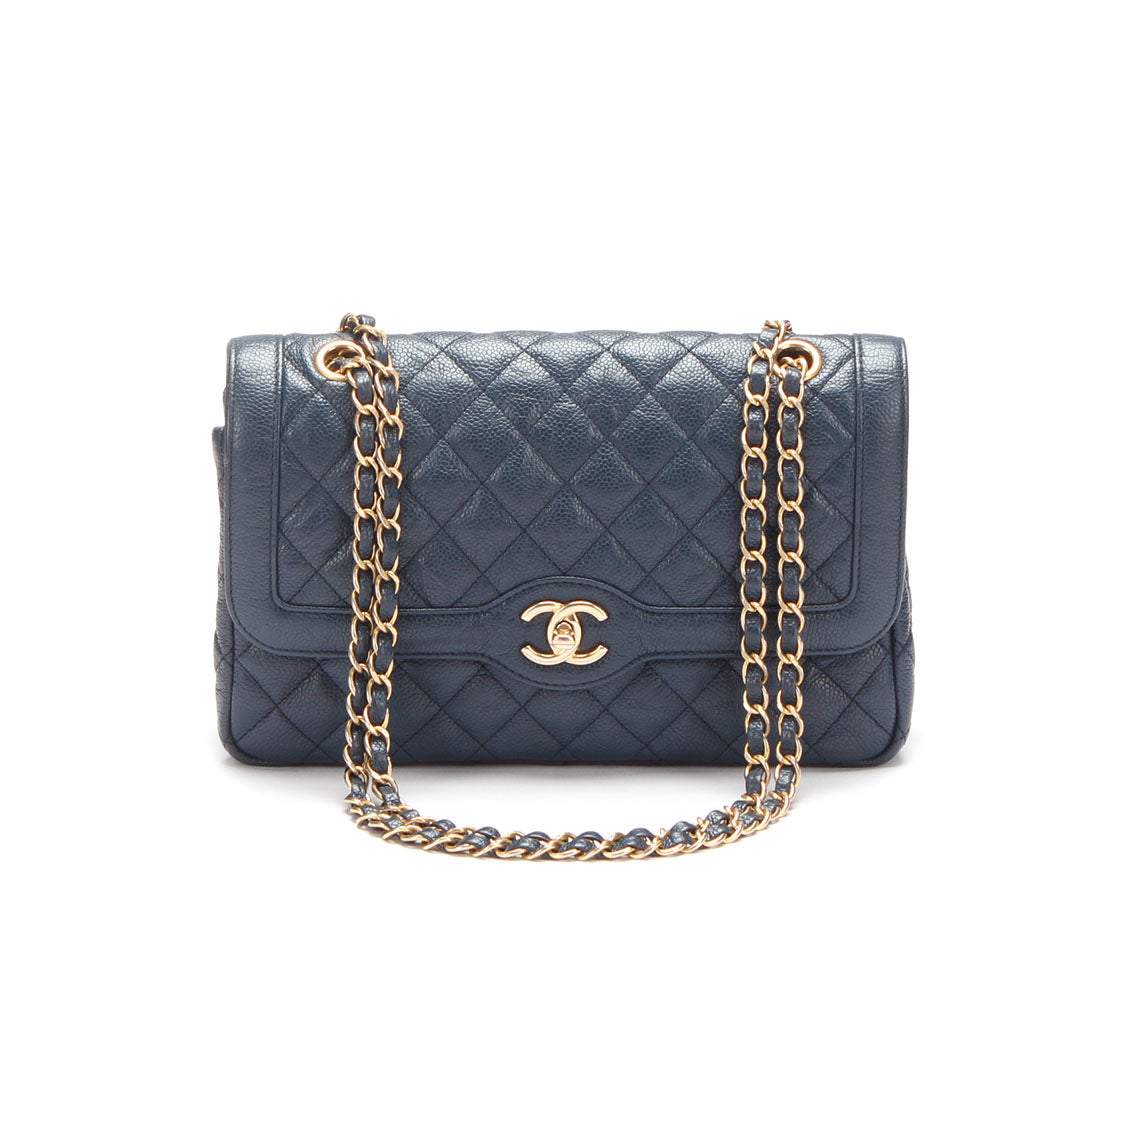 Chanel CC Quilted Caviar Flap Bag Leather Shoulder Bag in Good condition